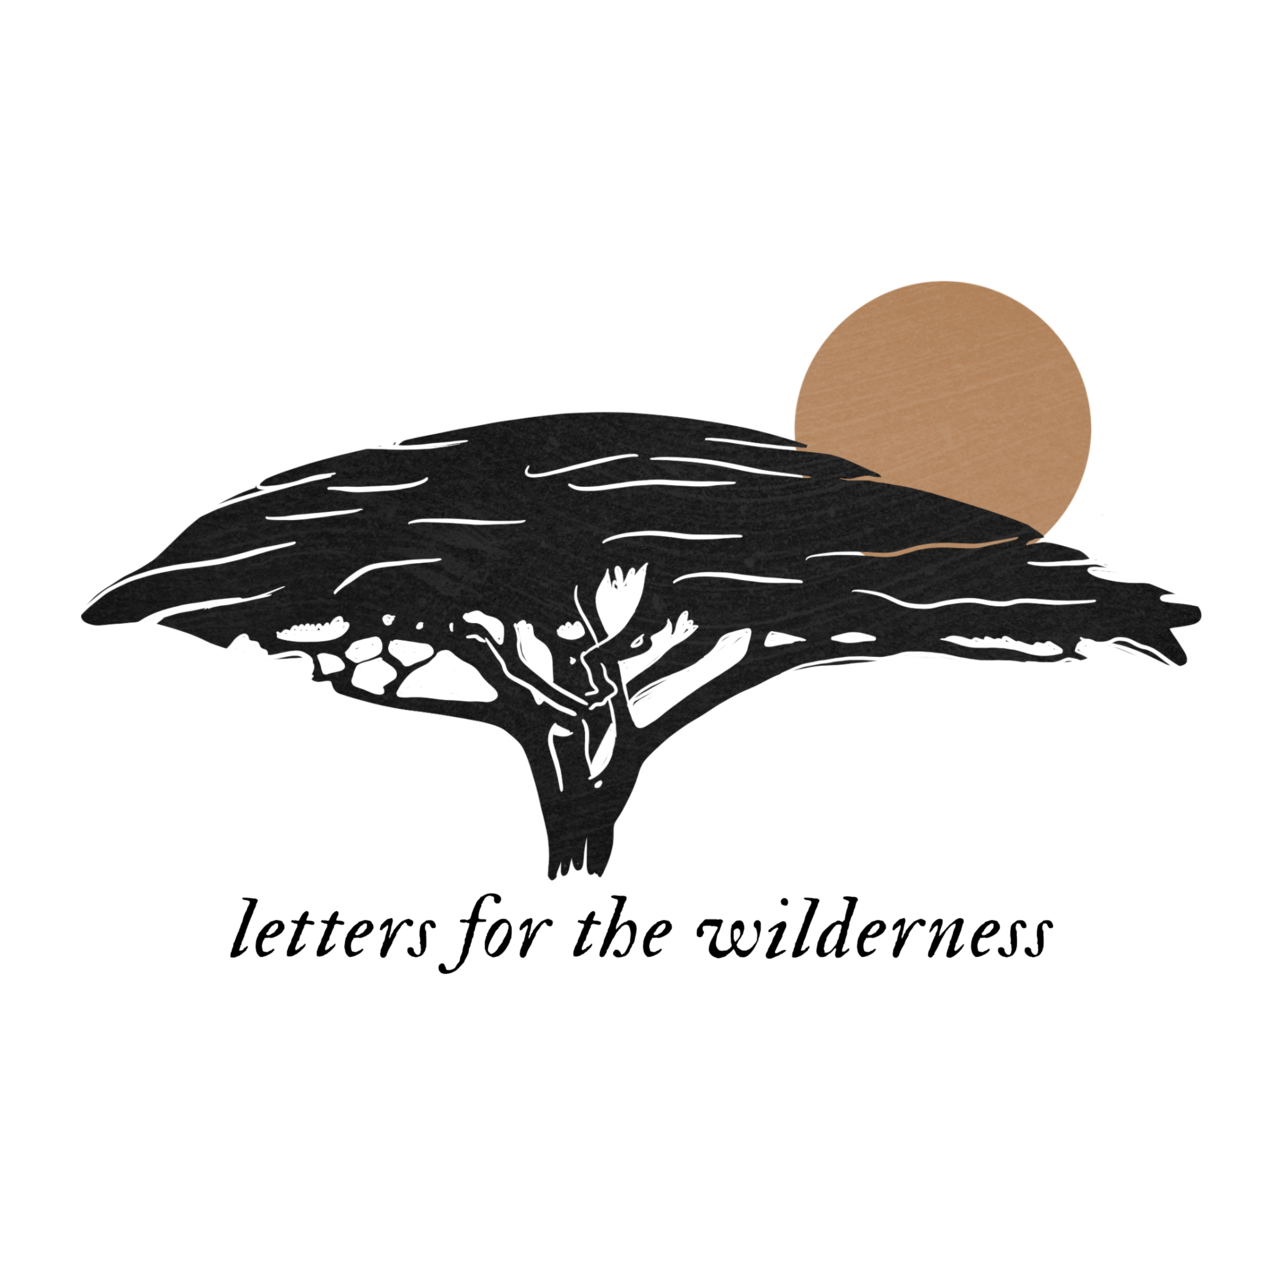 Letters for the Wilderness